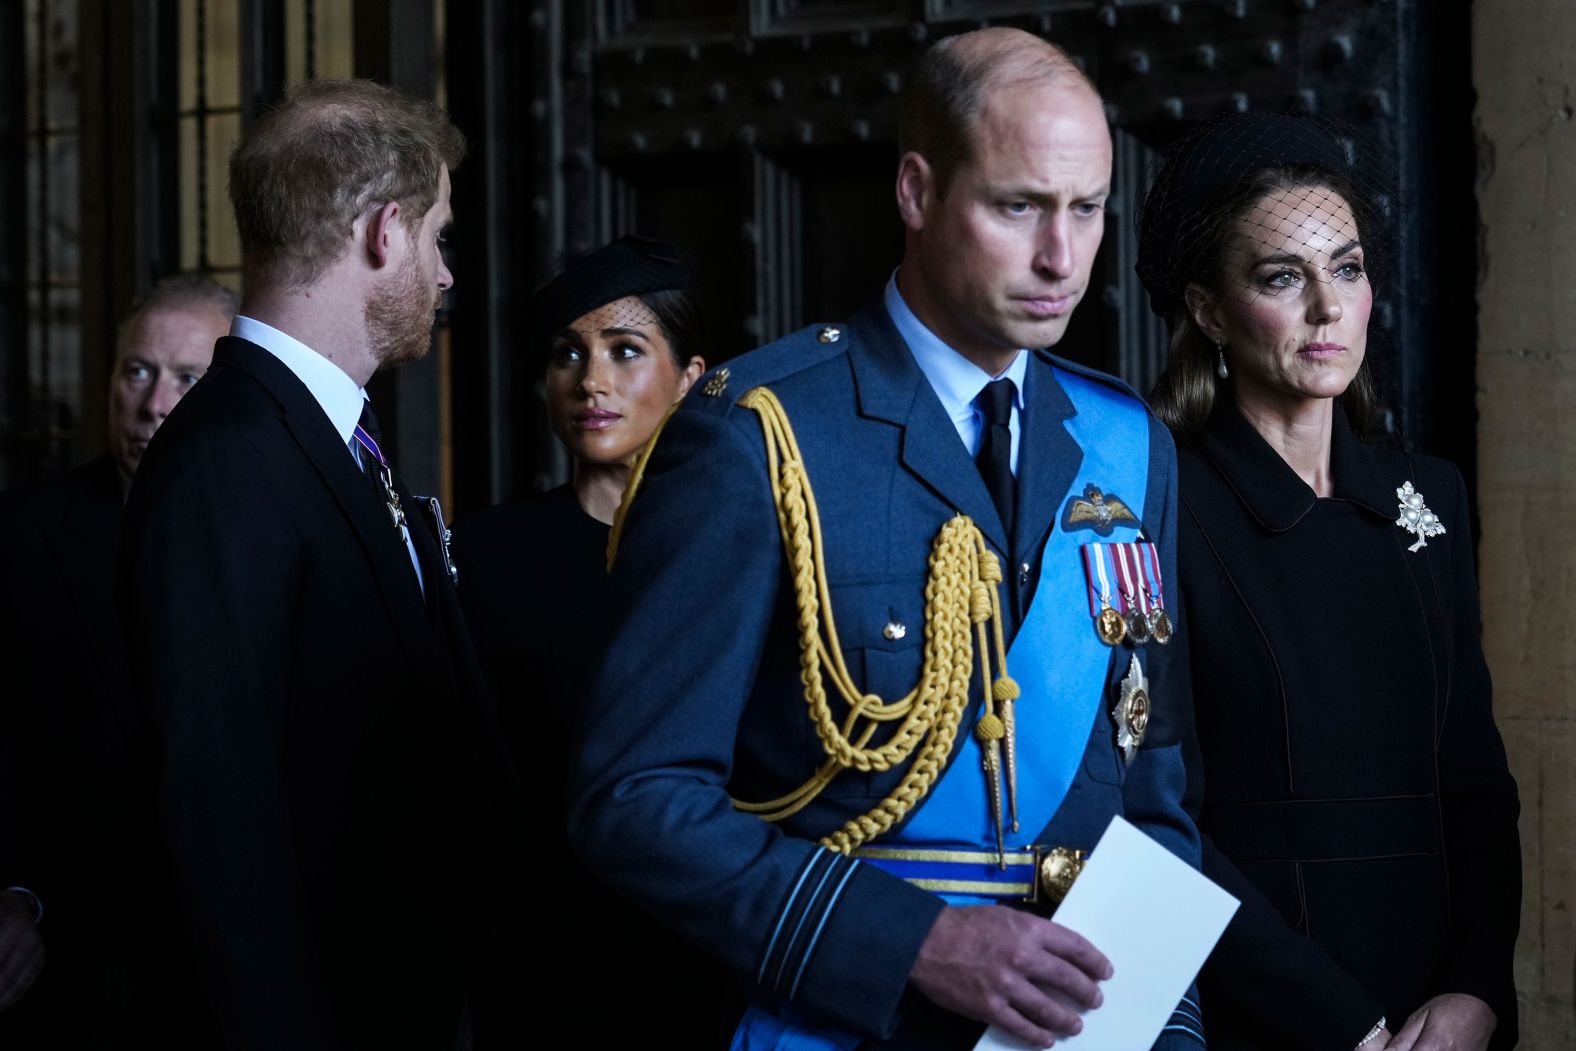 Prince Harry and Meghan walk behind Prince William and Kate as they leave Westminster Hall in London, where the Queen's coffin was lying in state.